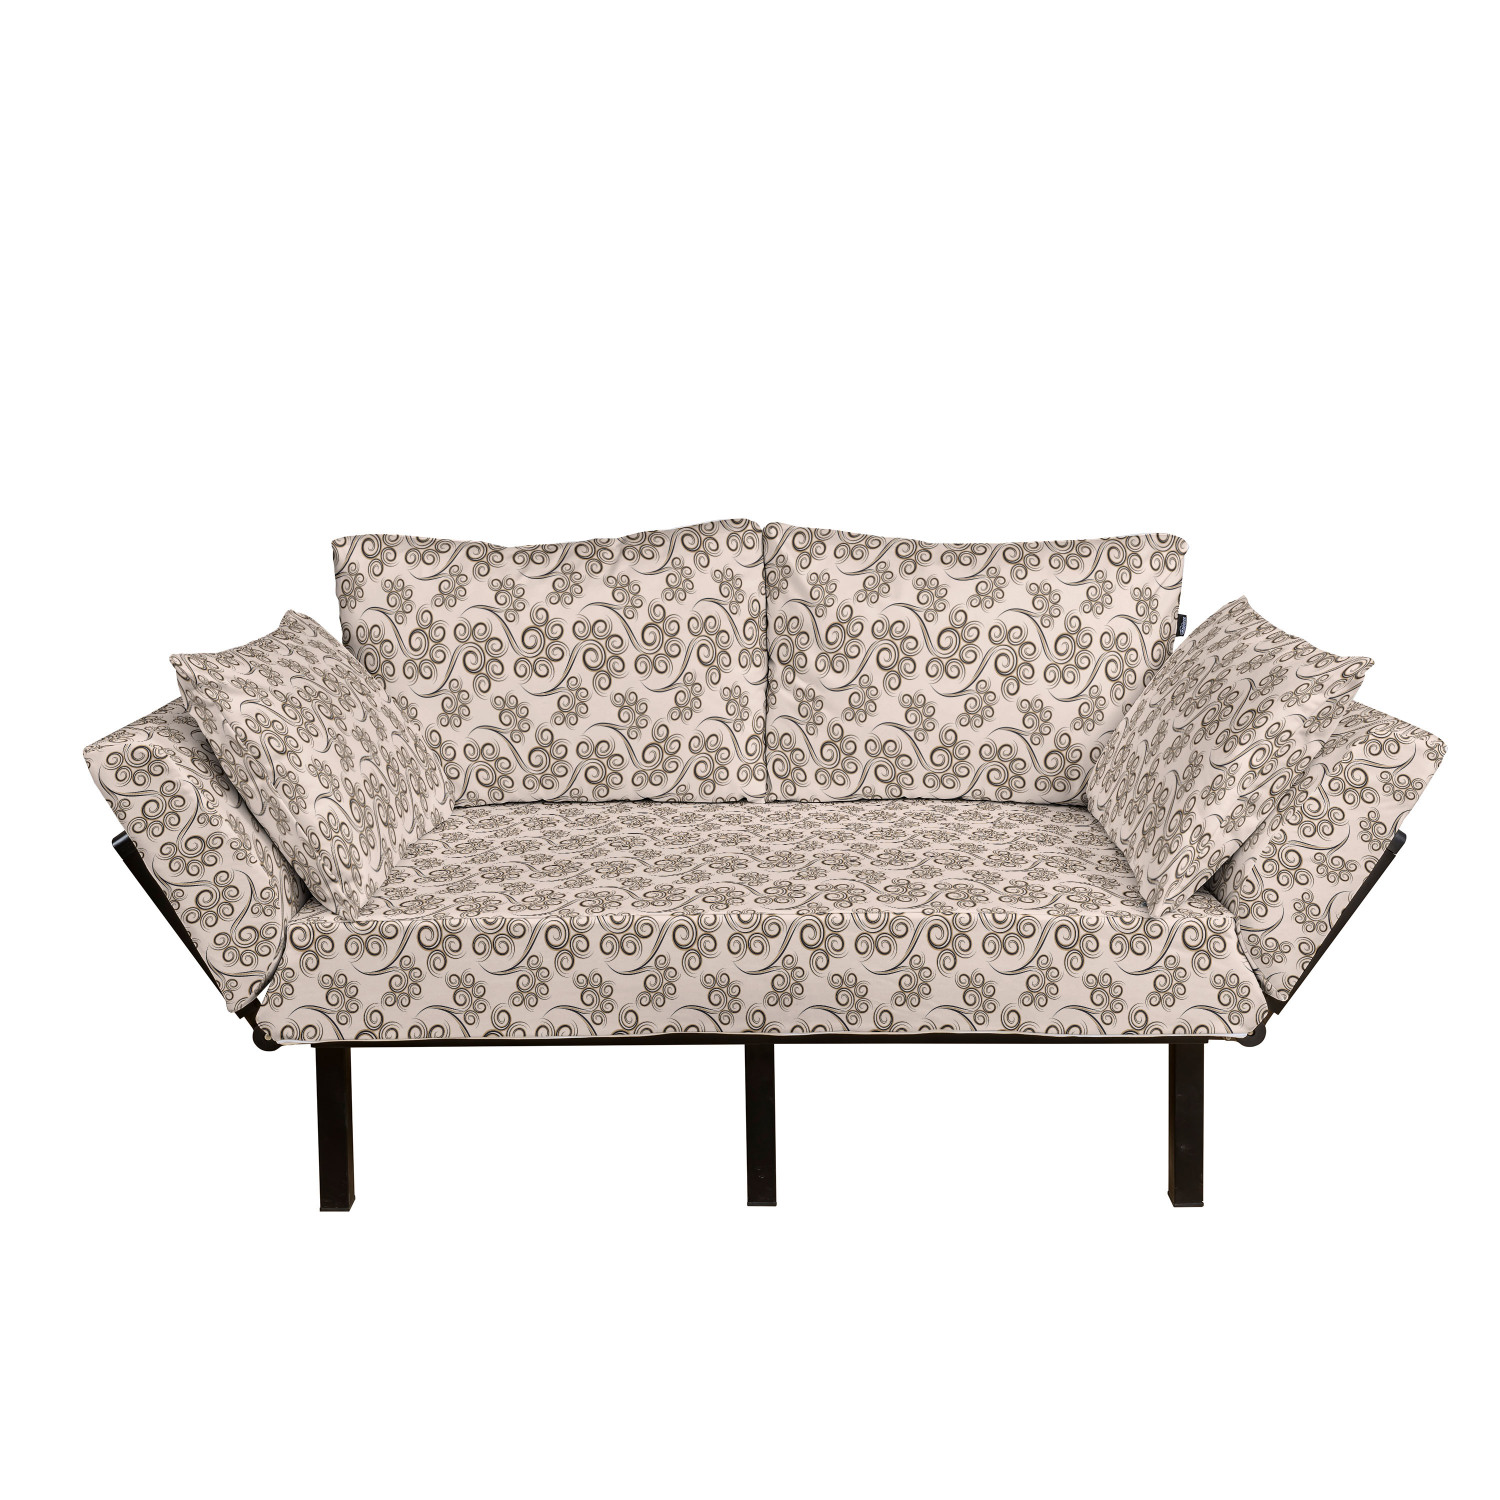 Loveseat Botanical Pastel Themed Pattern of Campanula and Echninacea Flowers Ambesonne Dragonfly Futon Couch Blush Pale Blue Mauve Daybed with Metal Frame Upholstered Sofa for Living Dorm